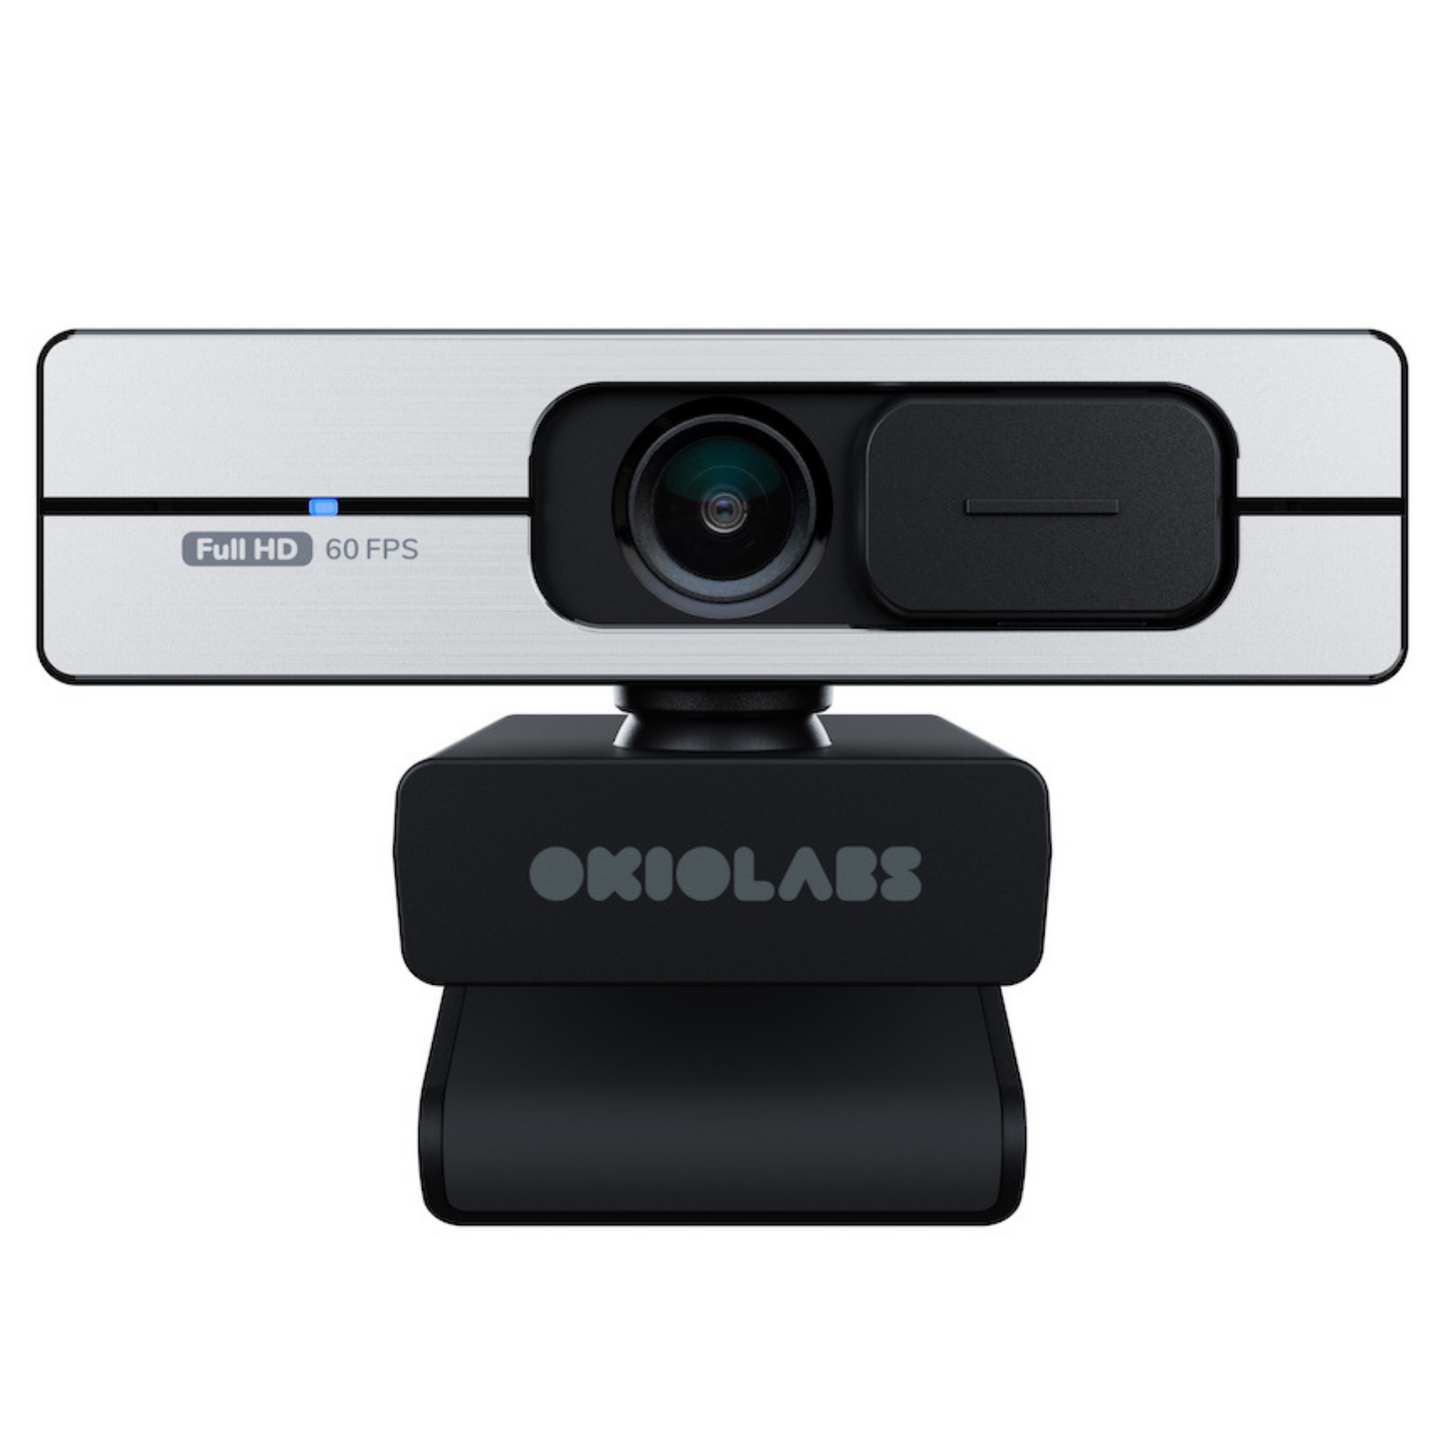 A6 1080p@60fps Webcam with Stereo Microphones USB